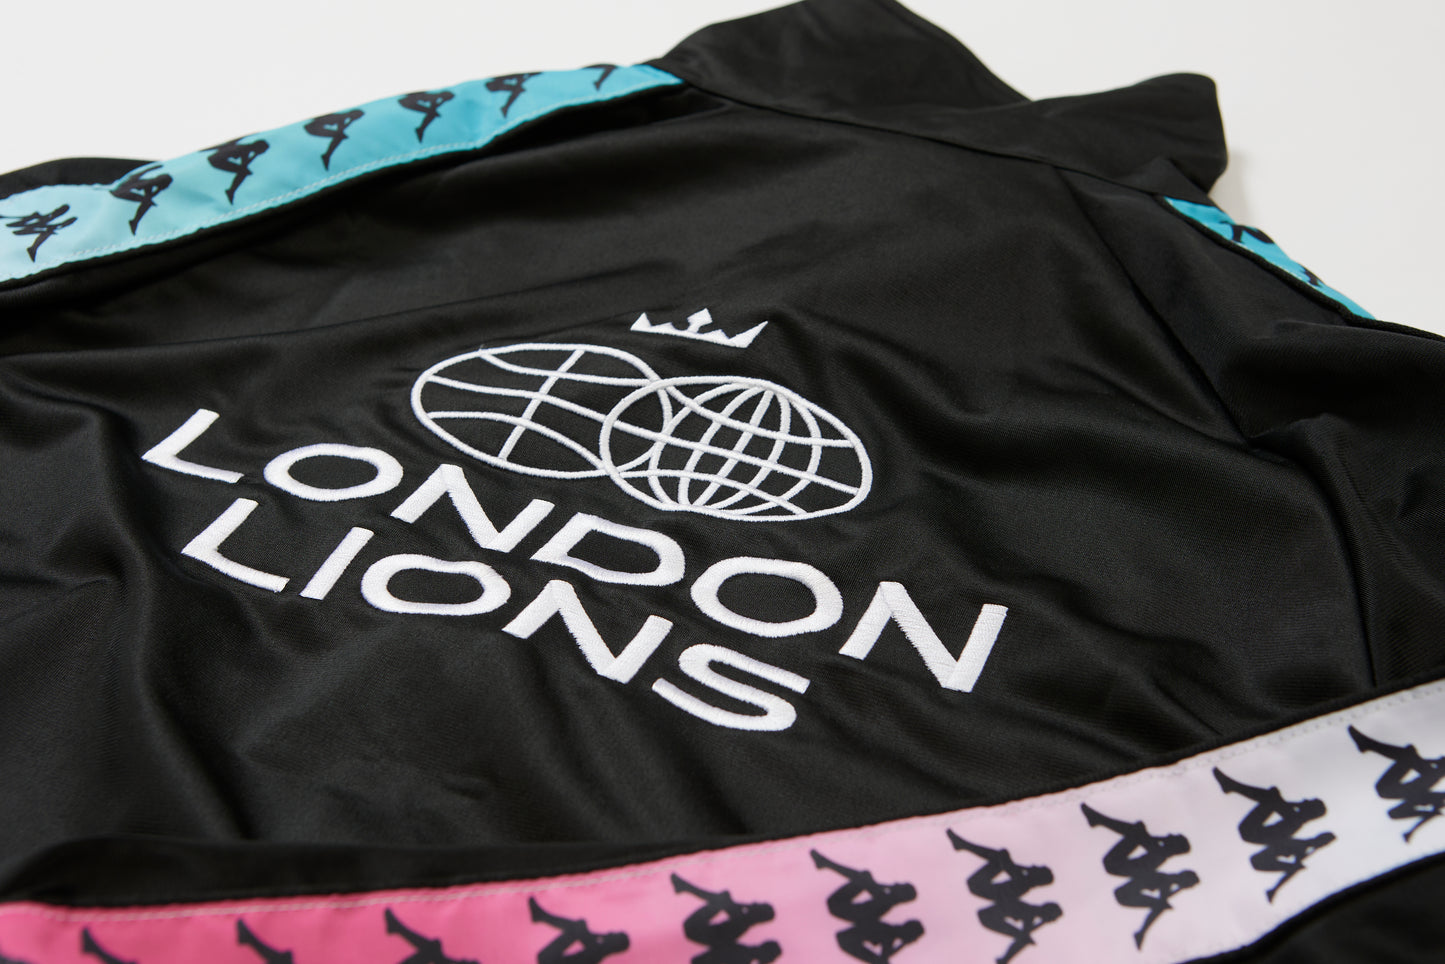 Limited Edition Kappa & London Lions City Tracksuit Top - Black